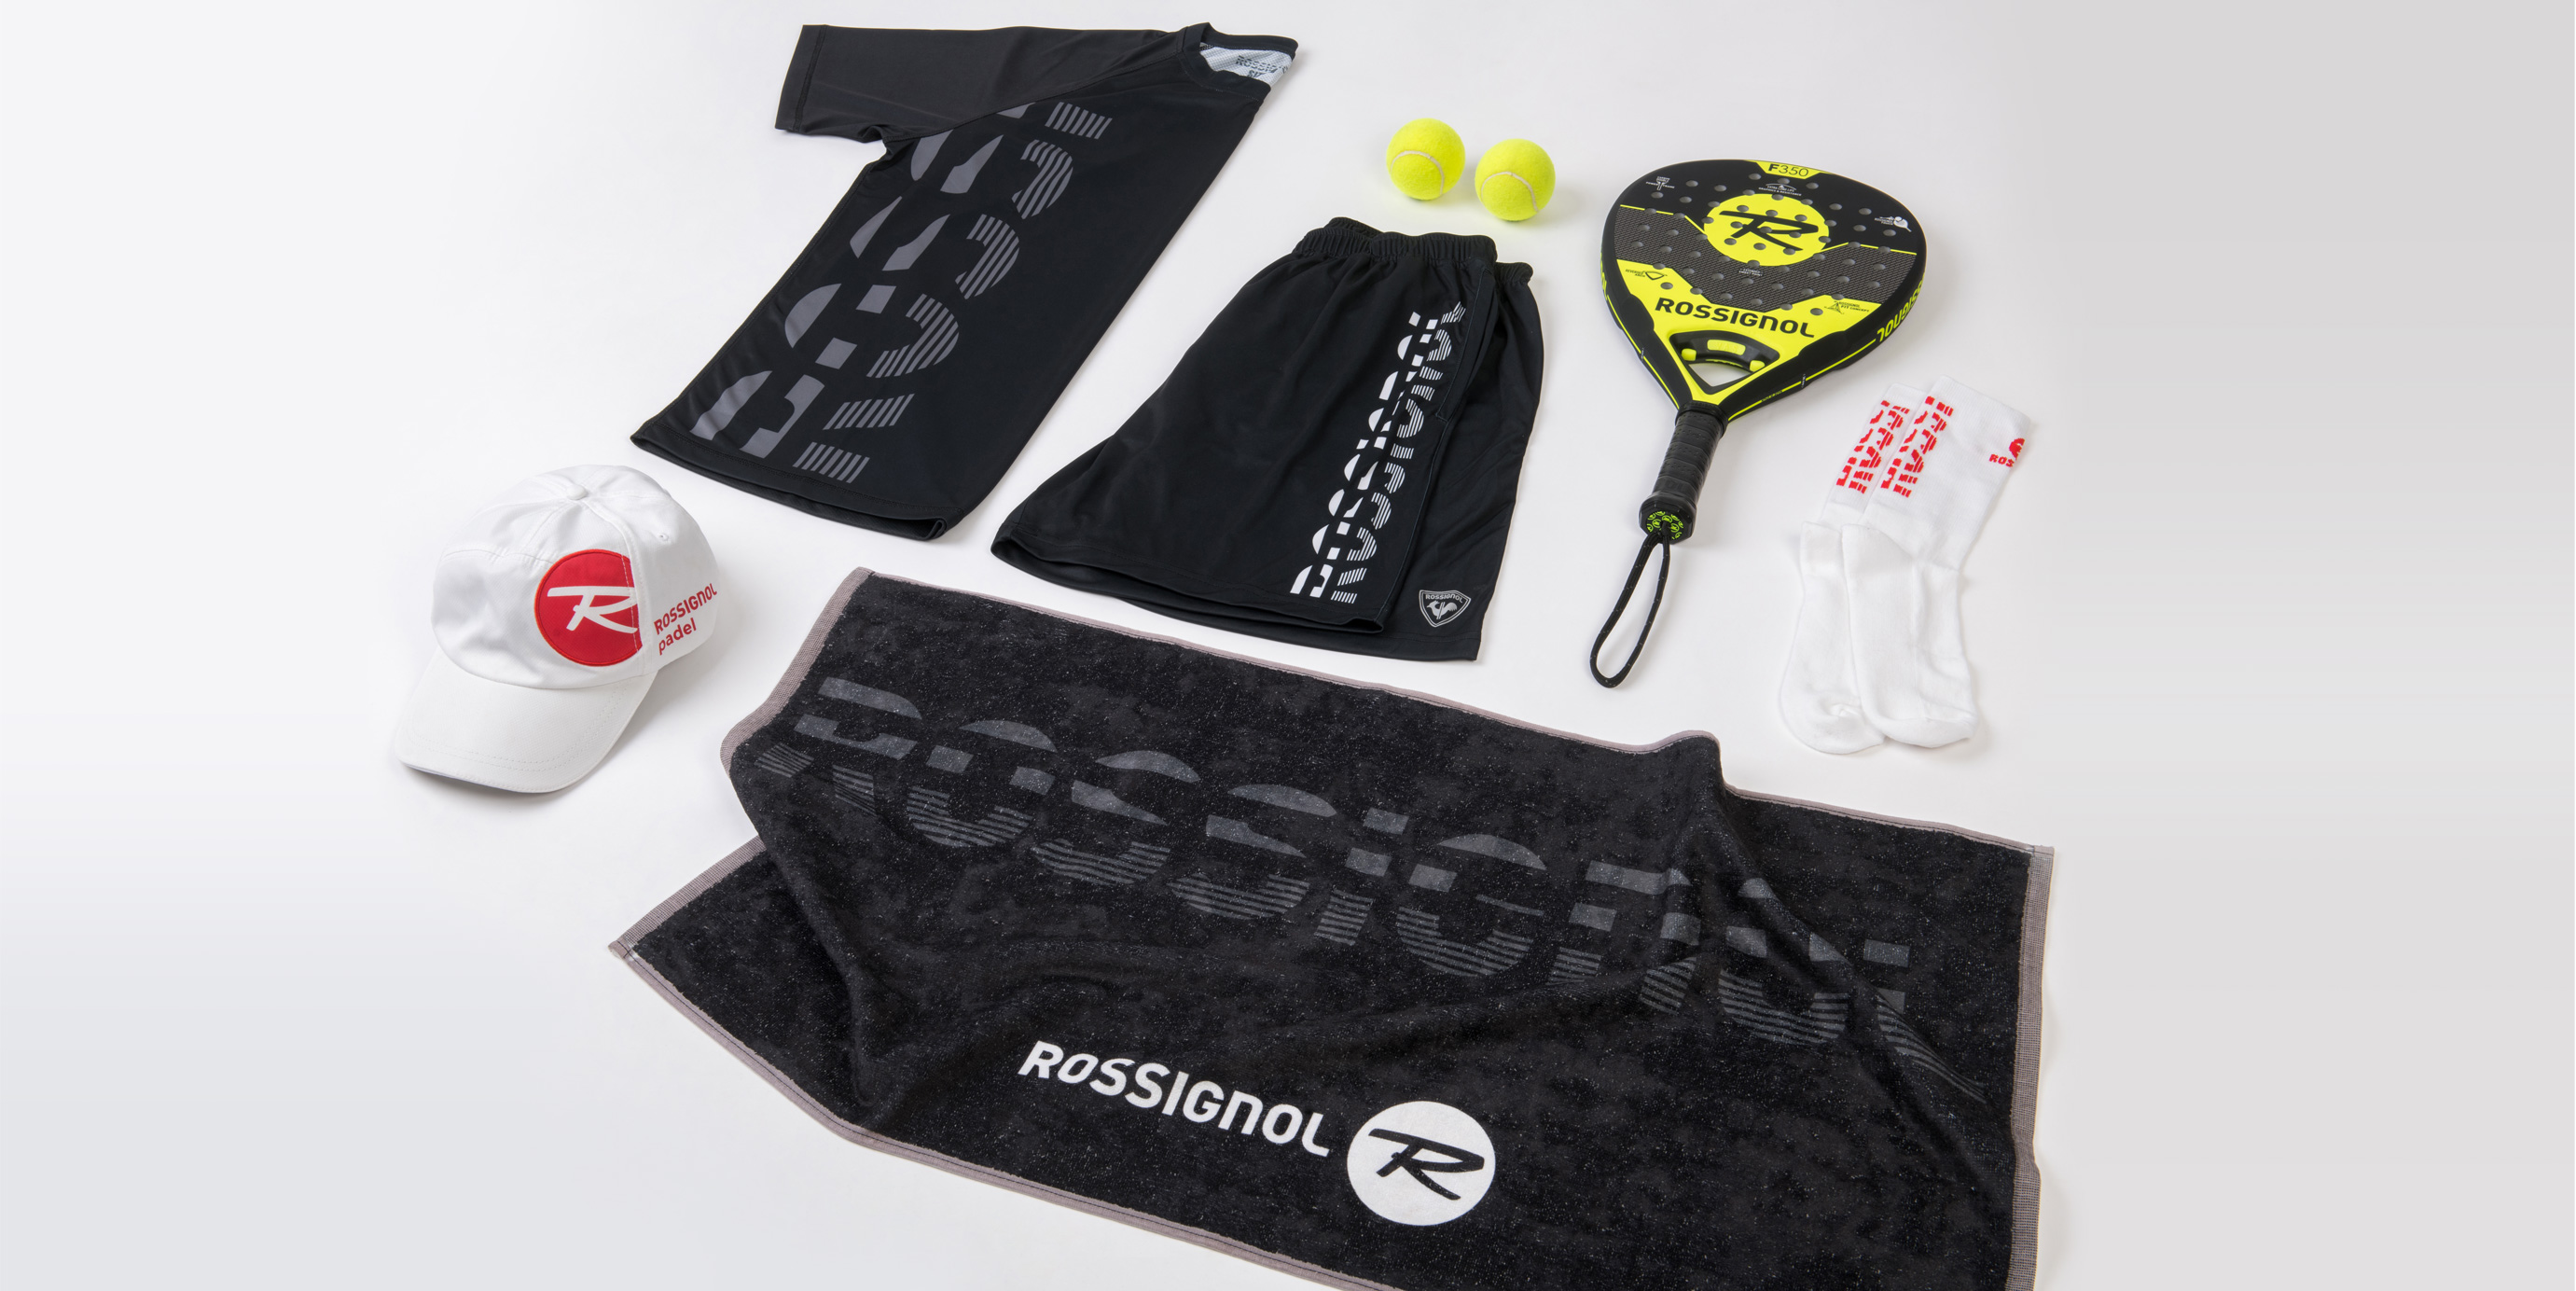 Rossignol clothing collection Design